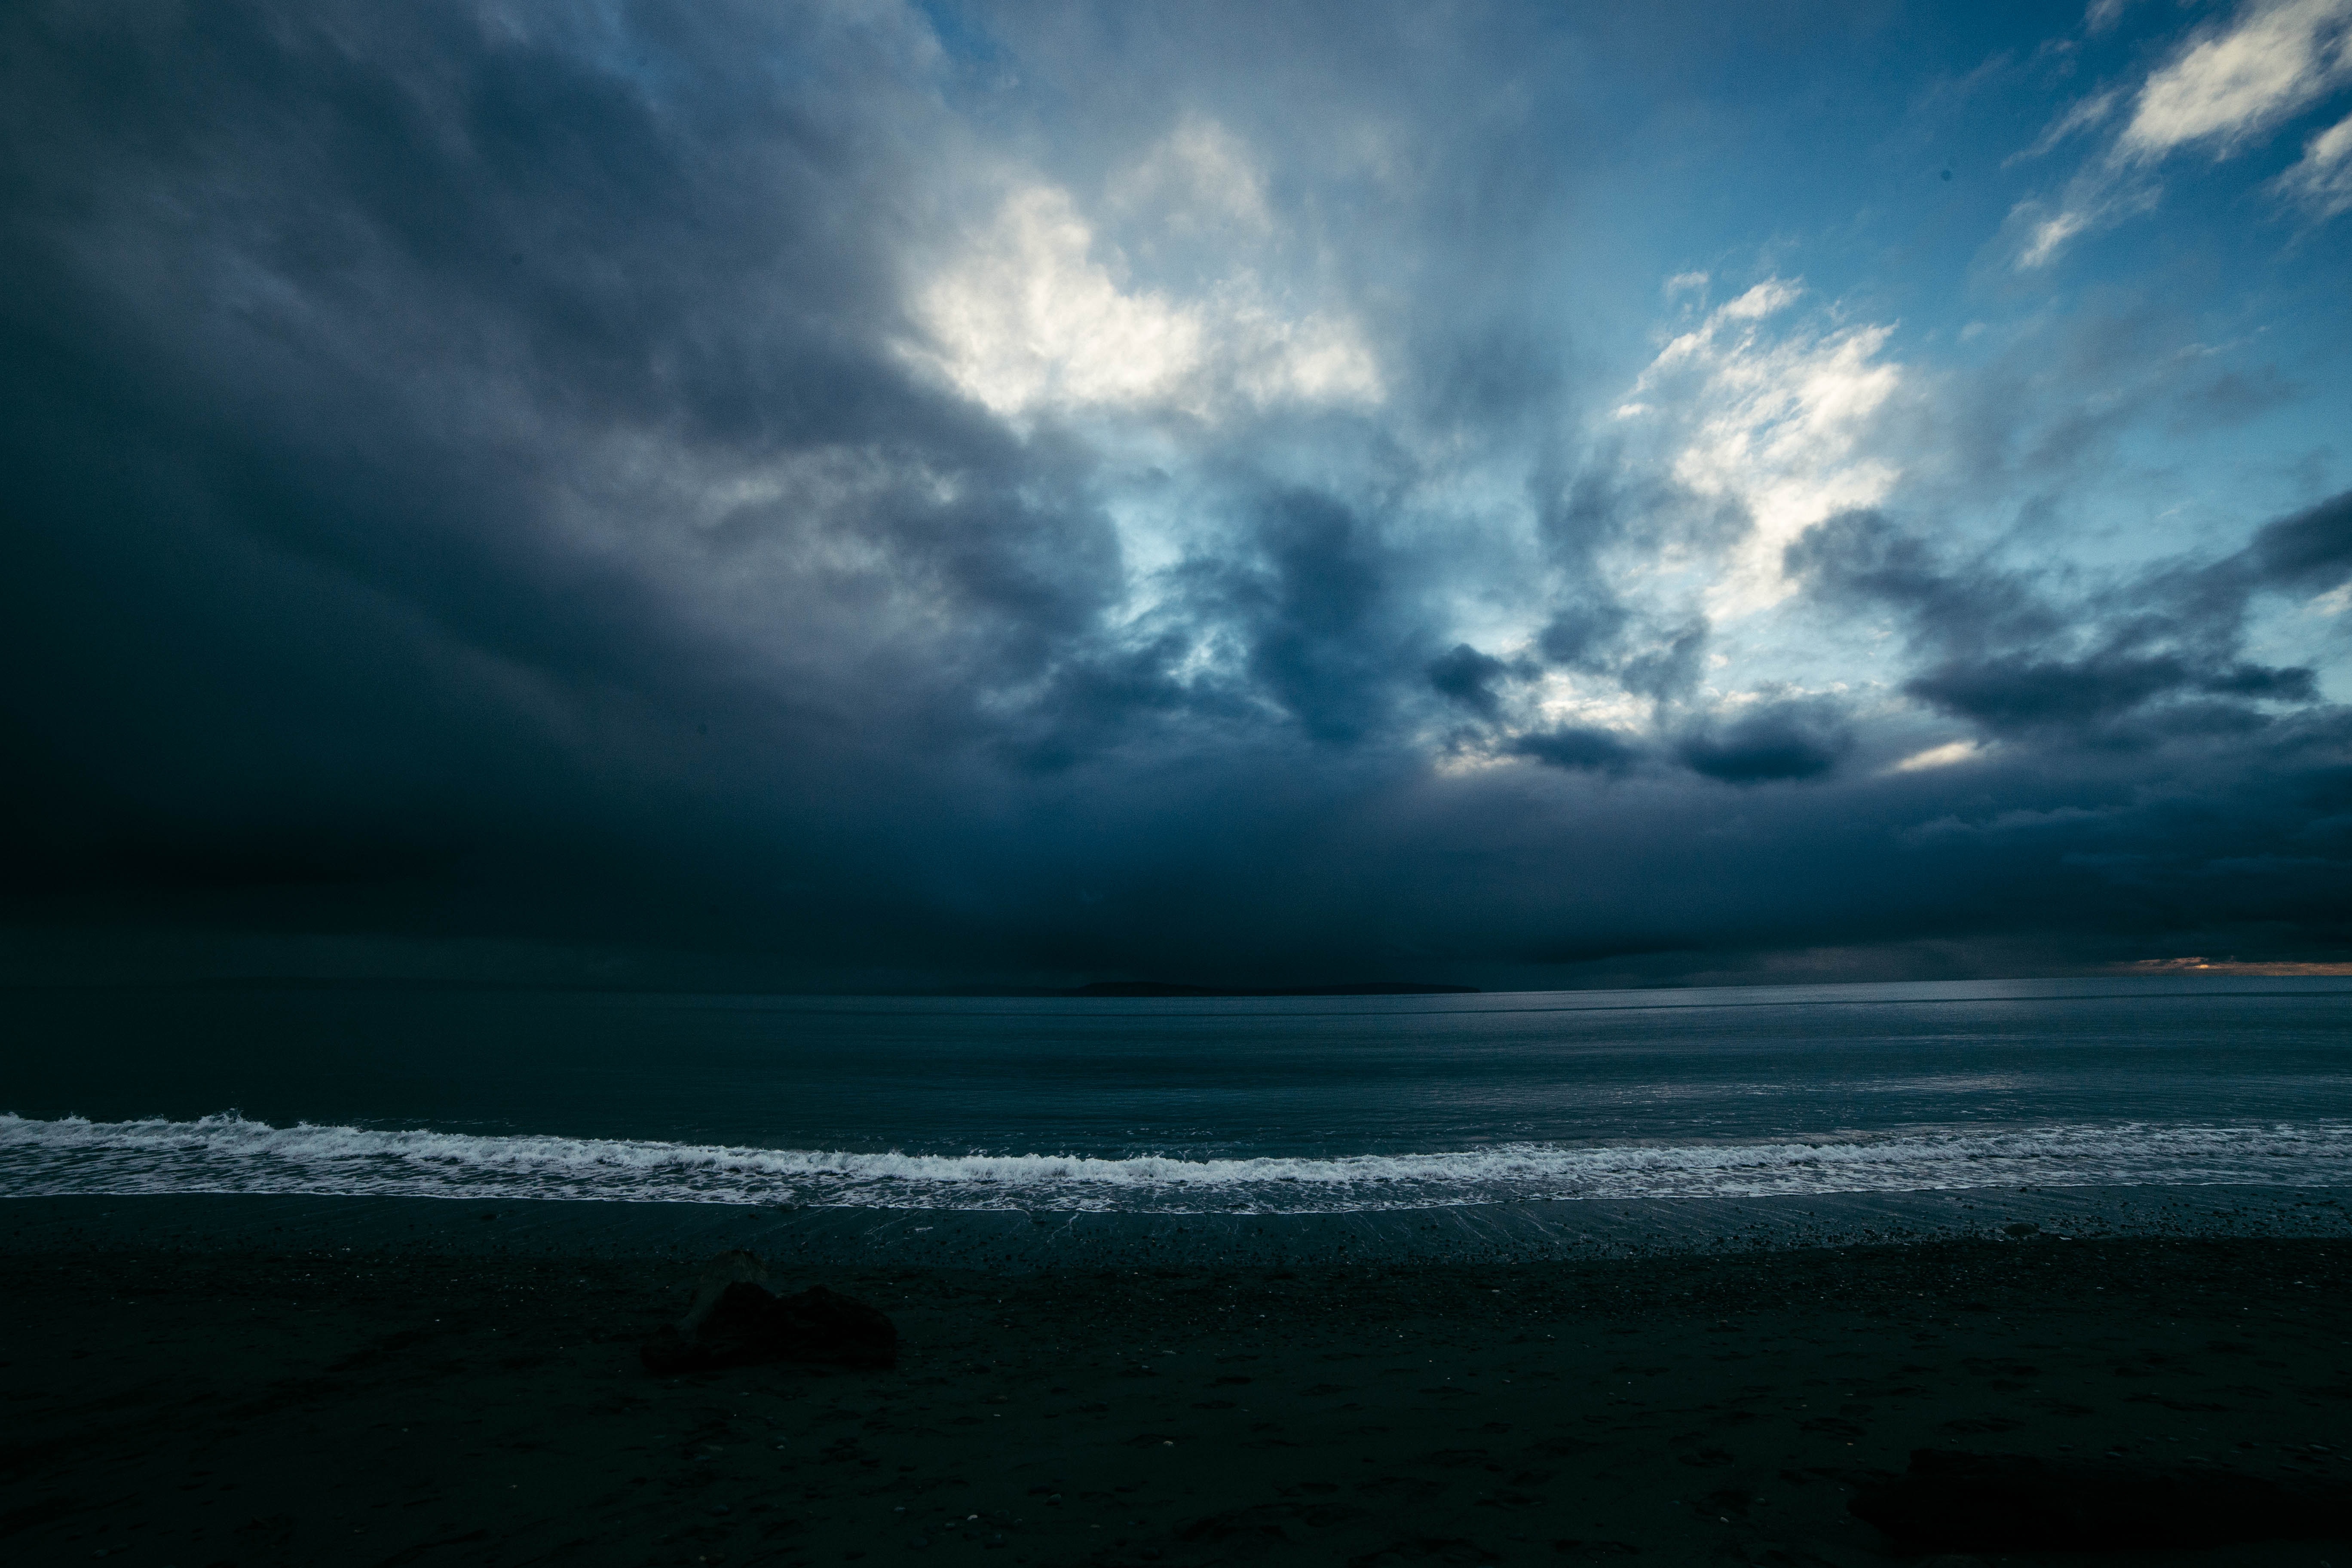 night, surf, shore, bank, overcast, nature, mainly cloudy, sea Full HD